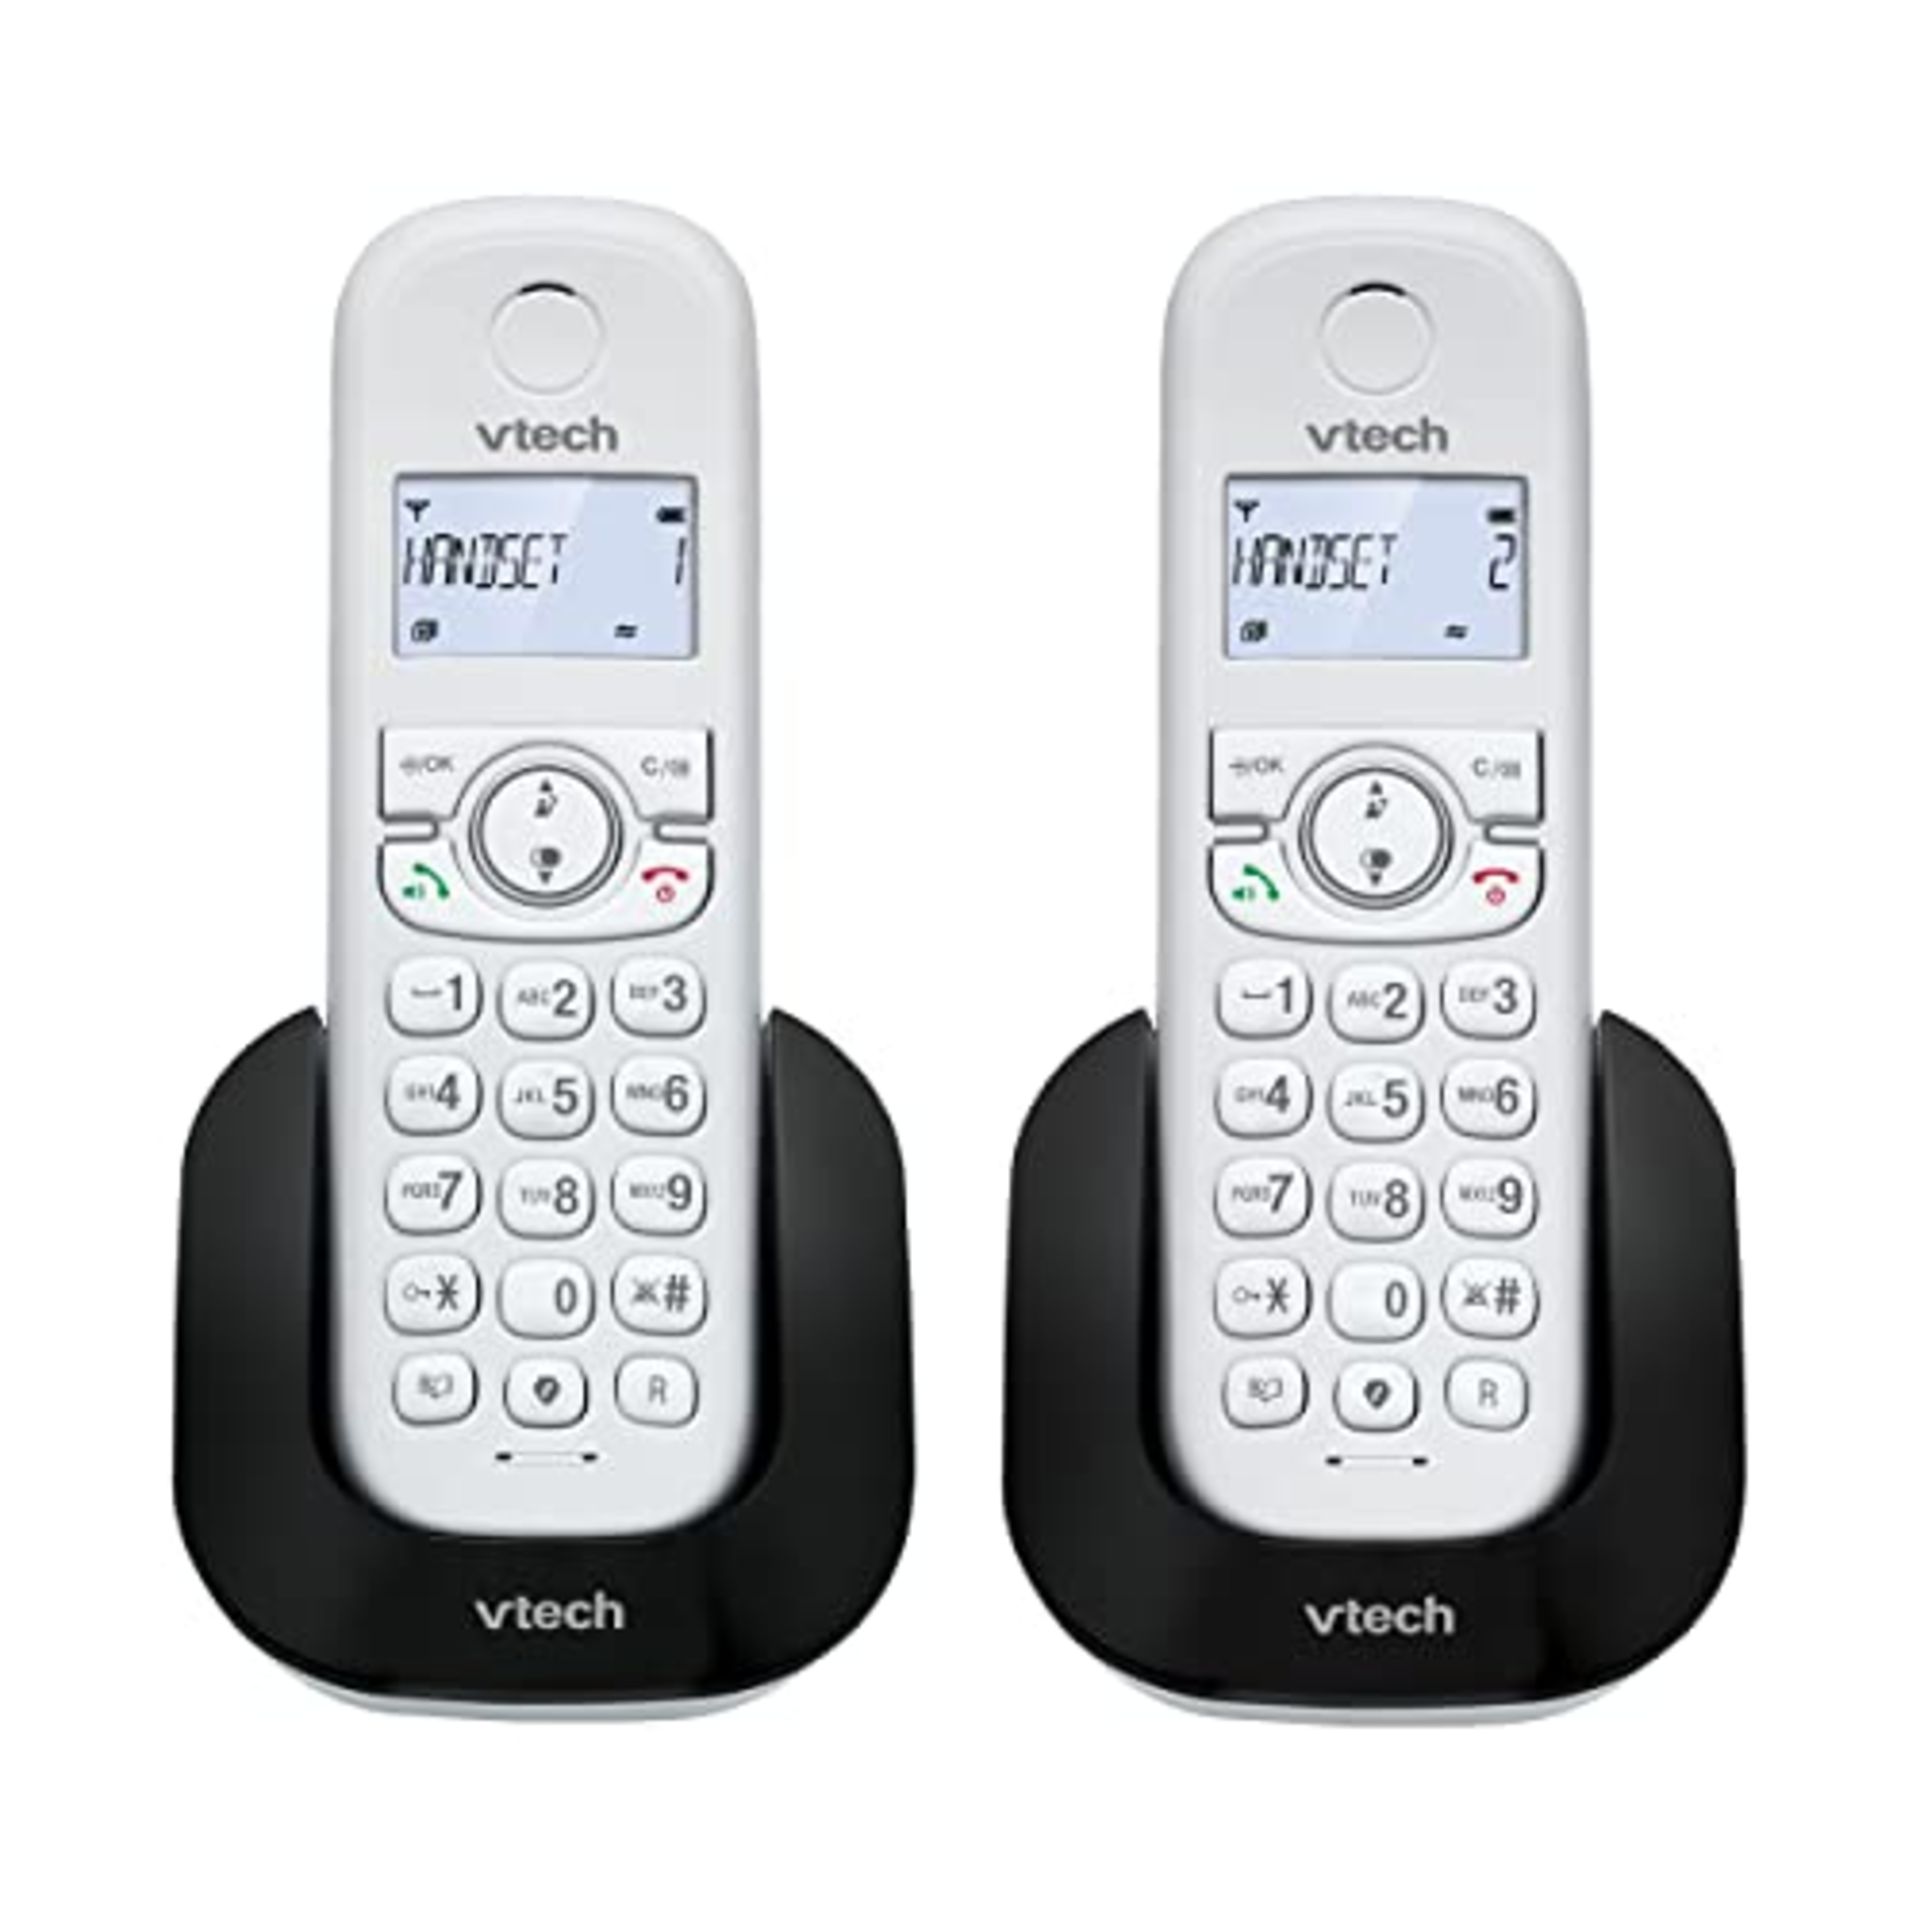 VTech CS1501 DECT Cordless Phone with Two Handsets, Call Blocking, Caller ID/Call Wait